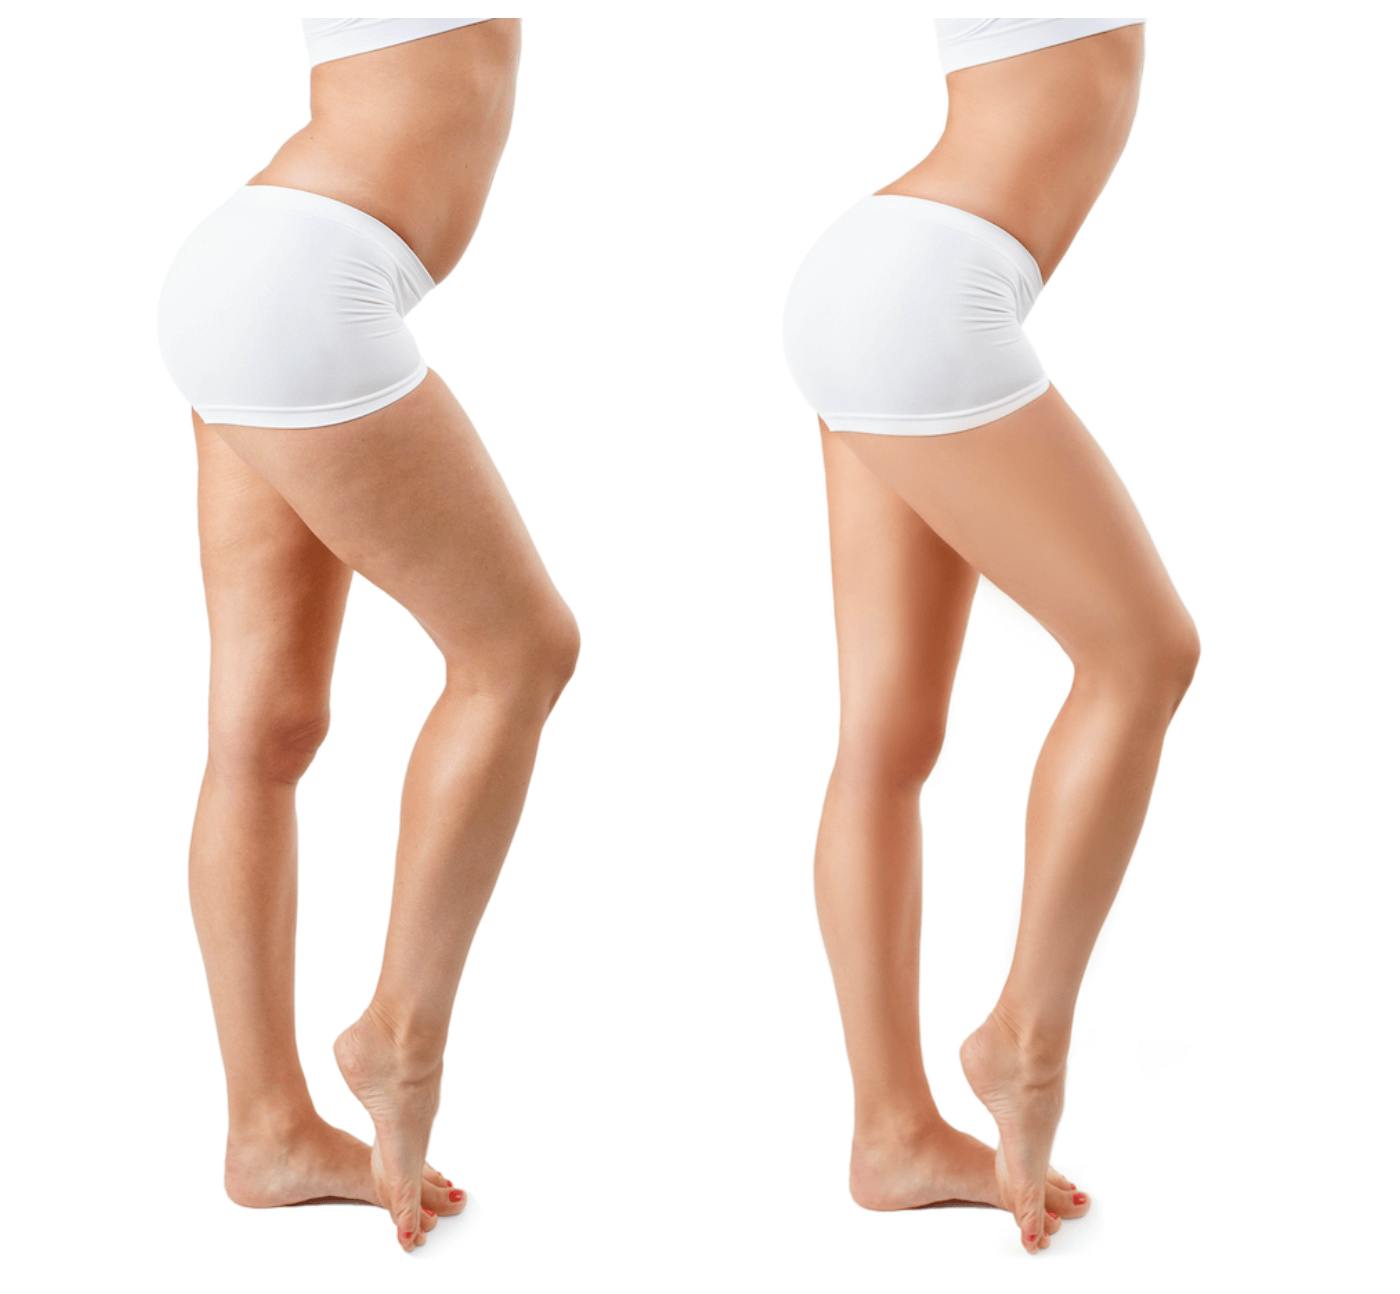 Dr. Garramone’s Favorite Treatment For Body Contouring And Skin Tightening